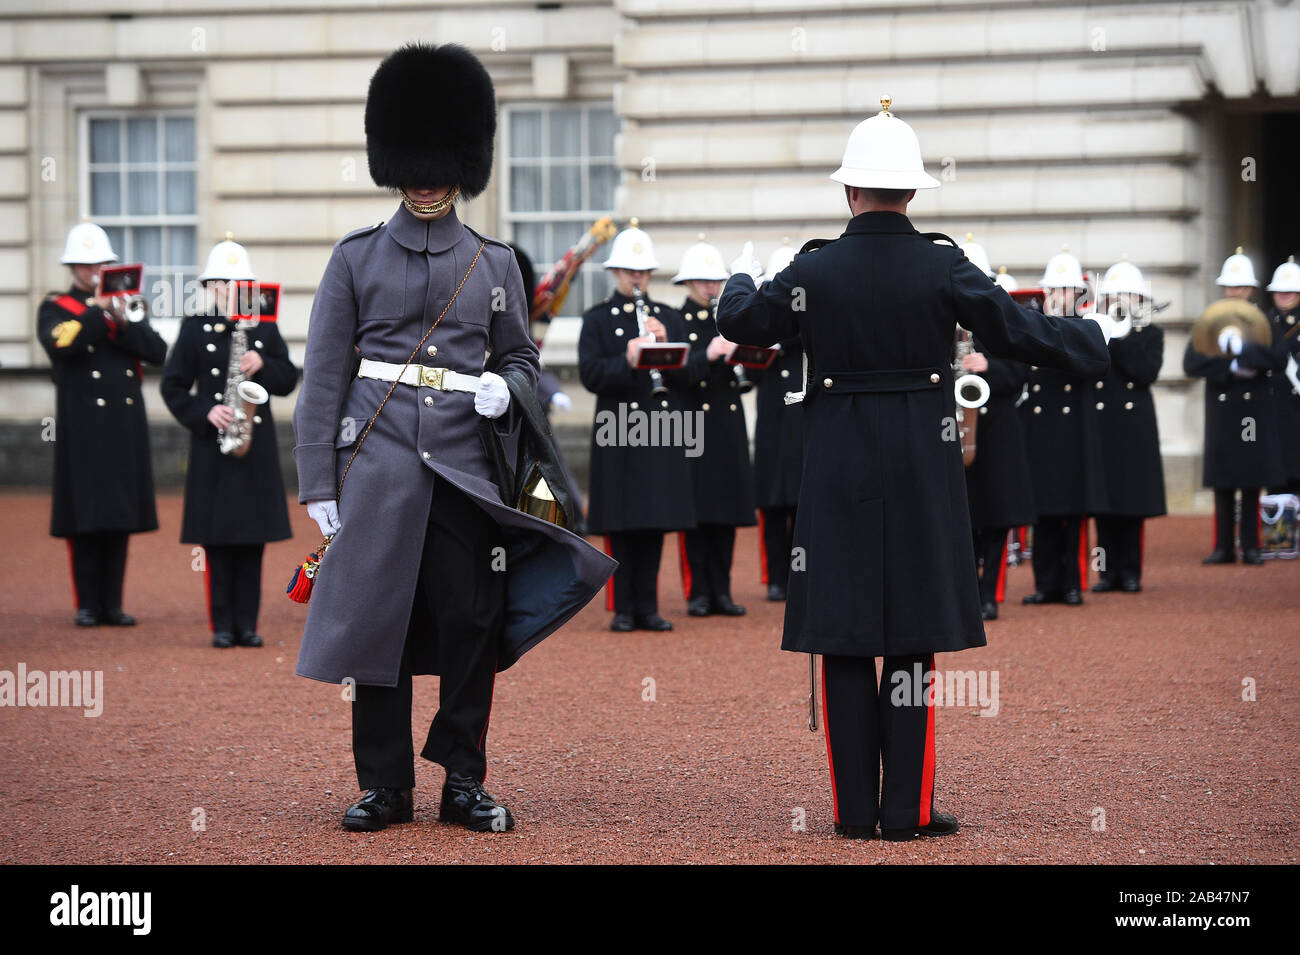 A Royal Navy officer (right) alongside a guardsman, as sailors from the Royal Navy perform the Changing of the Guard ceremony at Buckingham Palace, London, for the second time in its 357-year history. Stock Photo